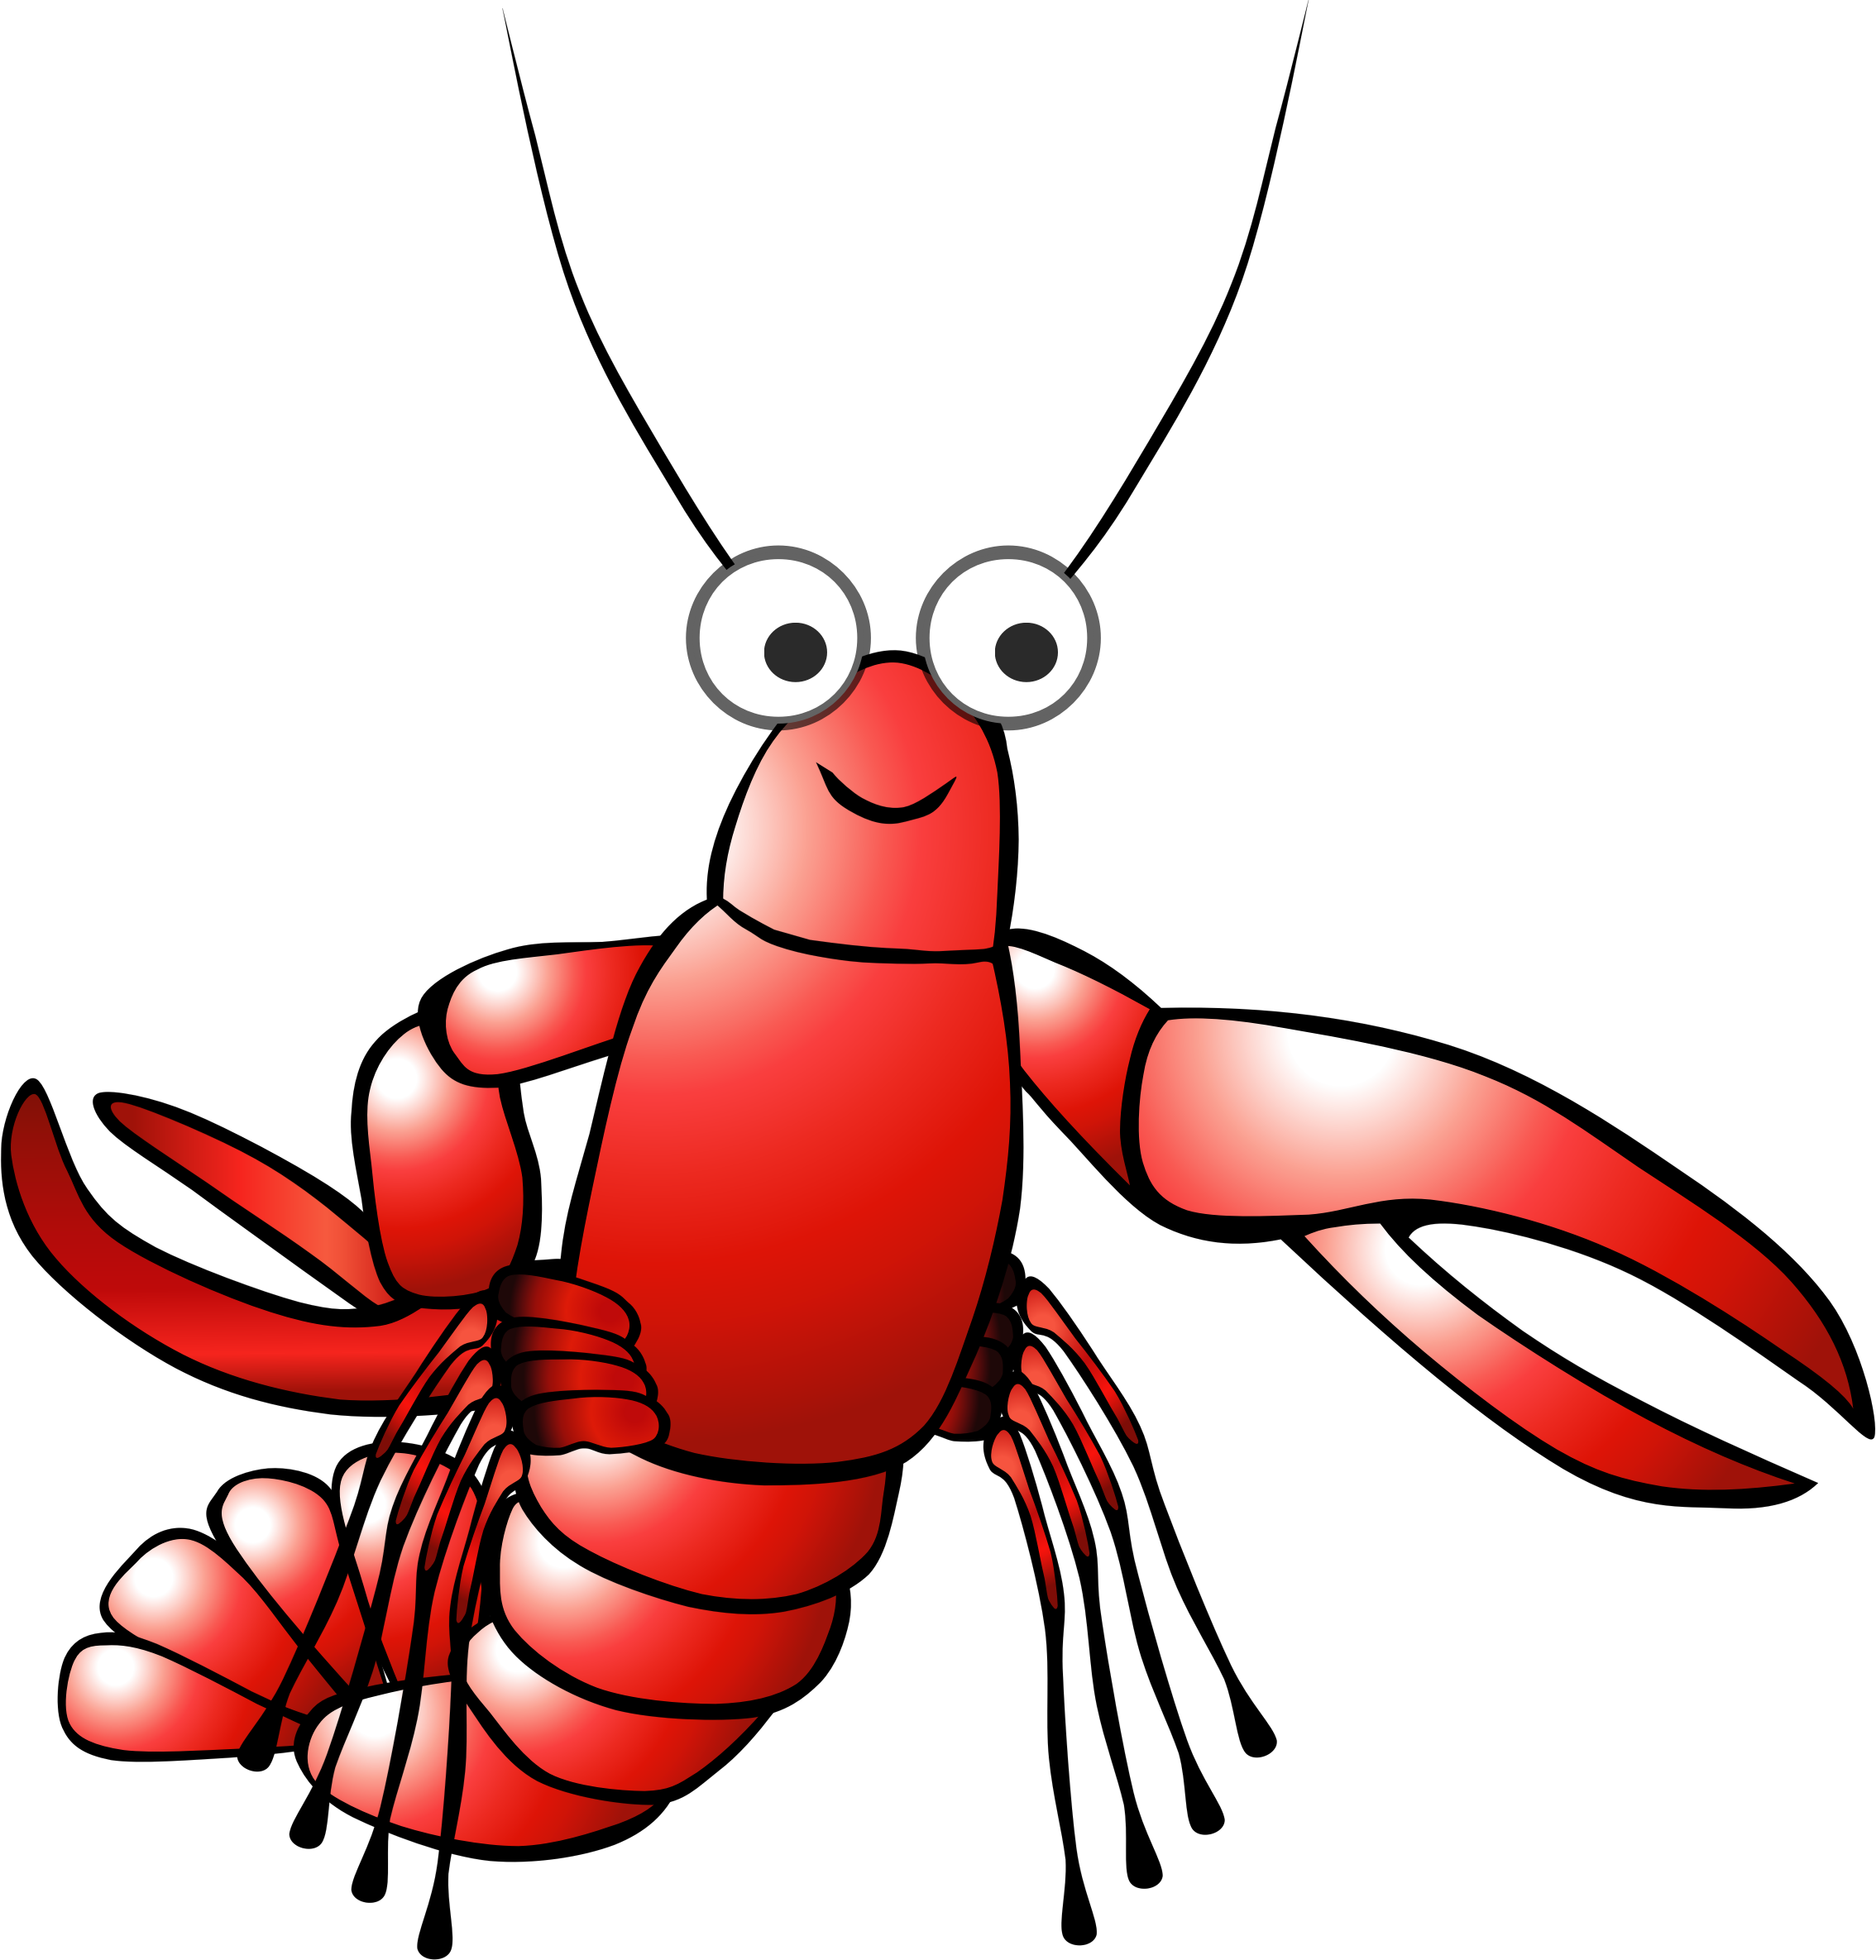 A Red Lobster With Big Eyes